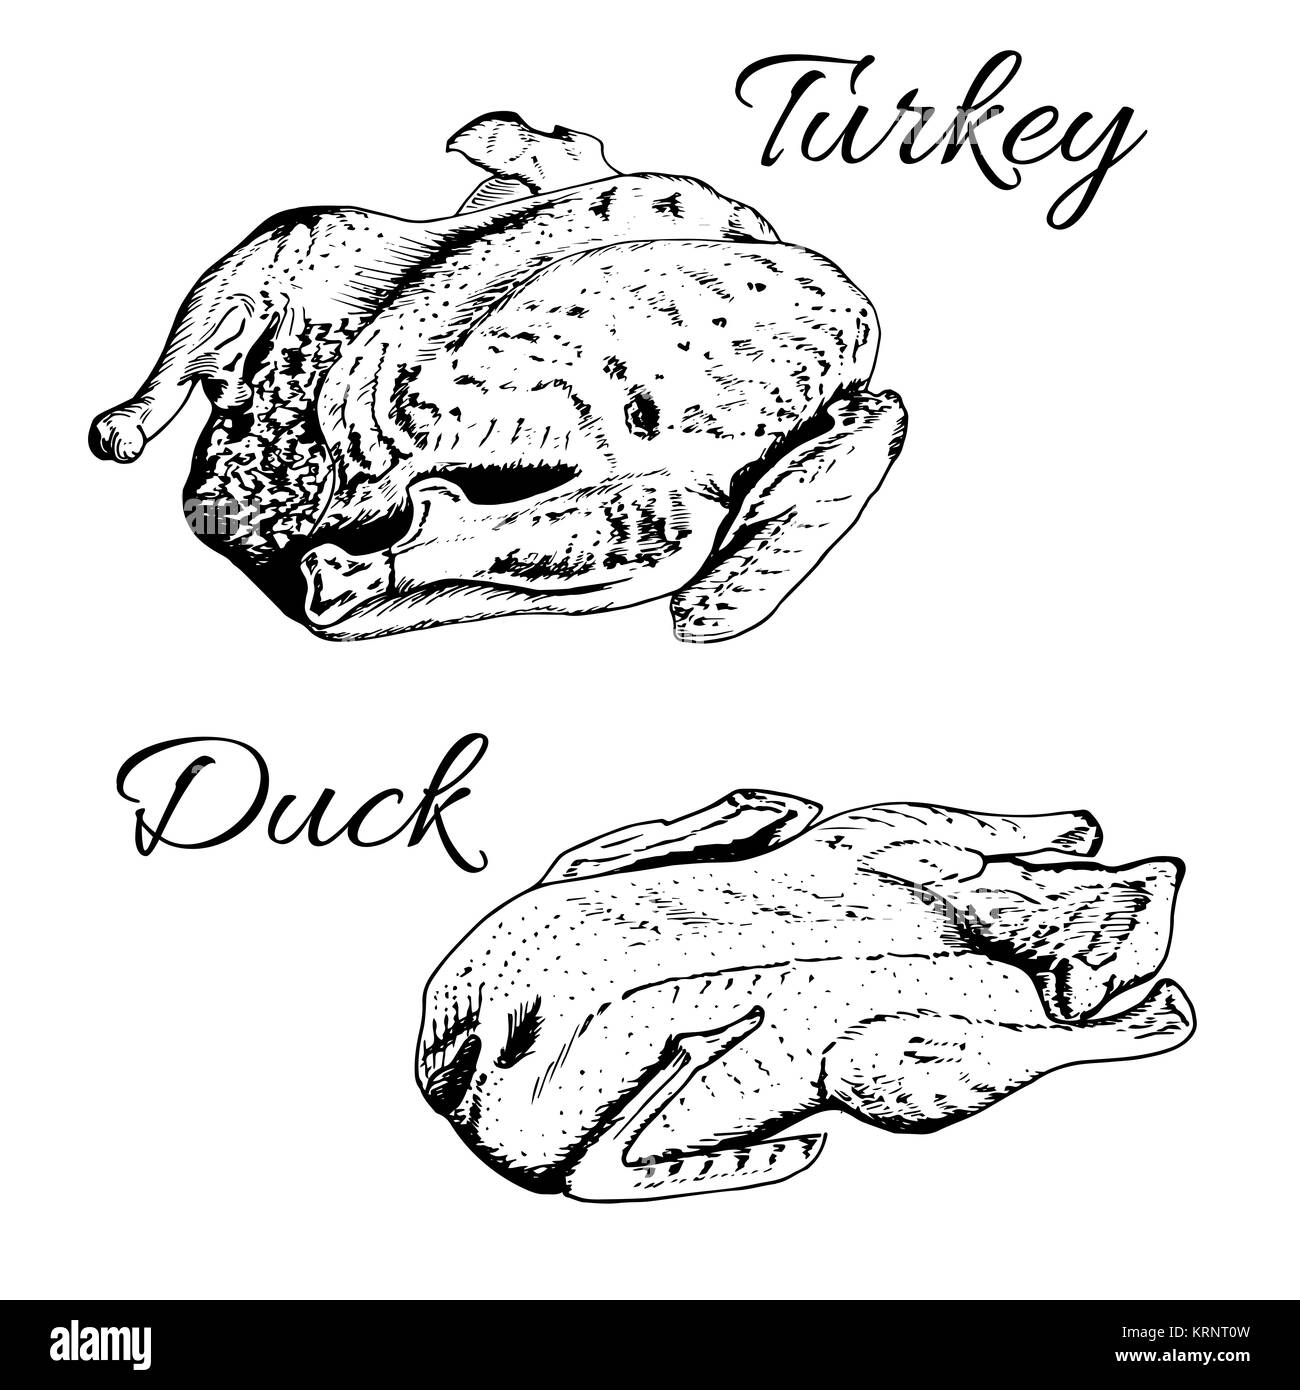 Sketch of turkey and duck. Stock Photo